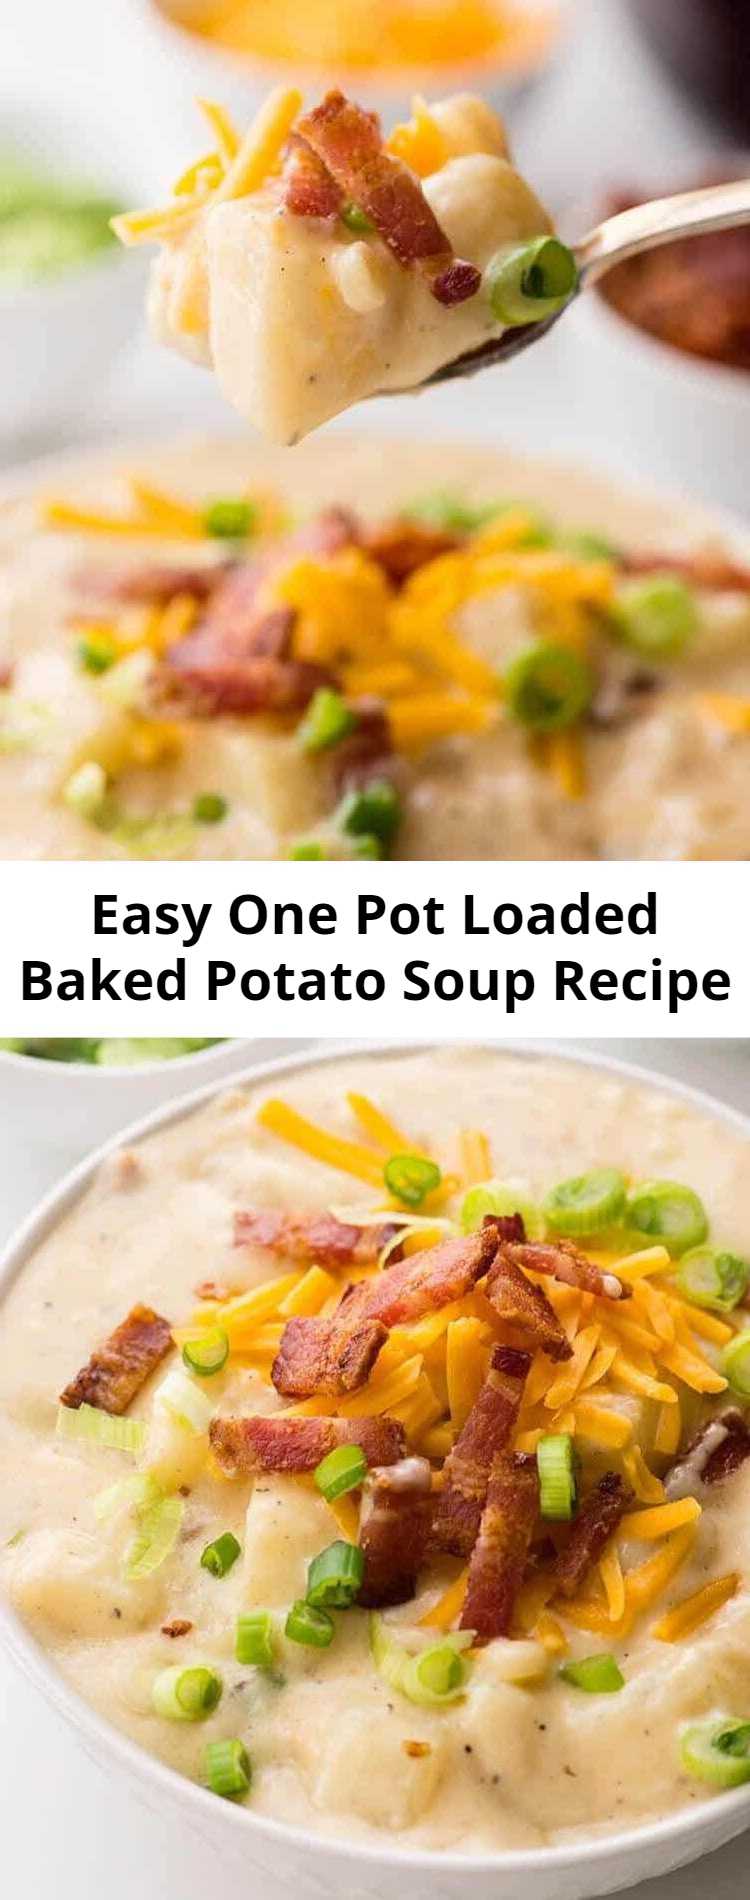 Easy One Pot Loaded Baked Potato Soup Recipe - This loaded baked potato soup recipe is so easy to make and it's all in one pot for easy clean up - it's rich, filling and tastes amazing - the perfect comfort food